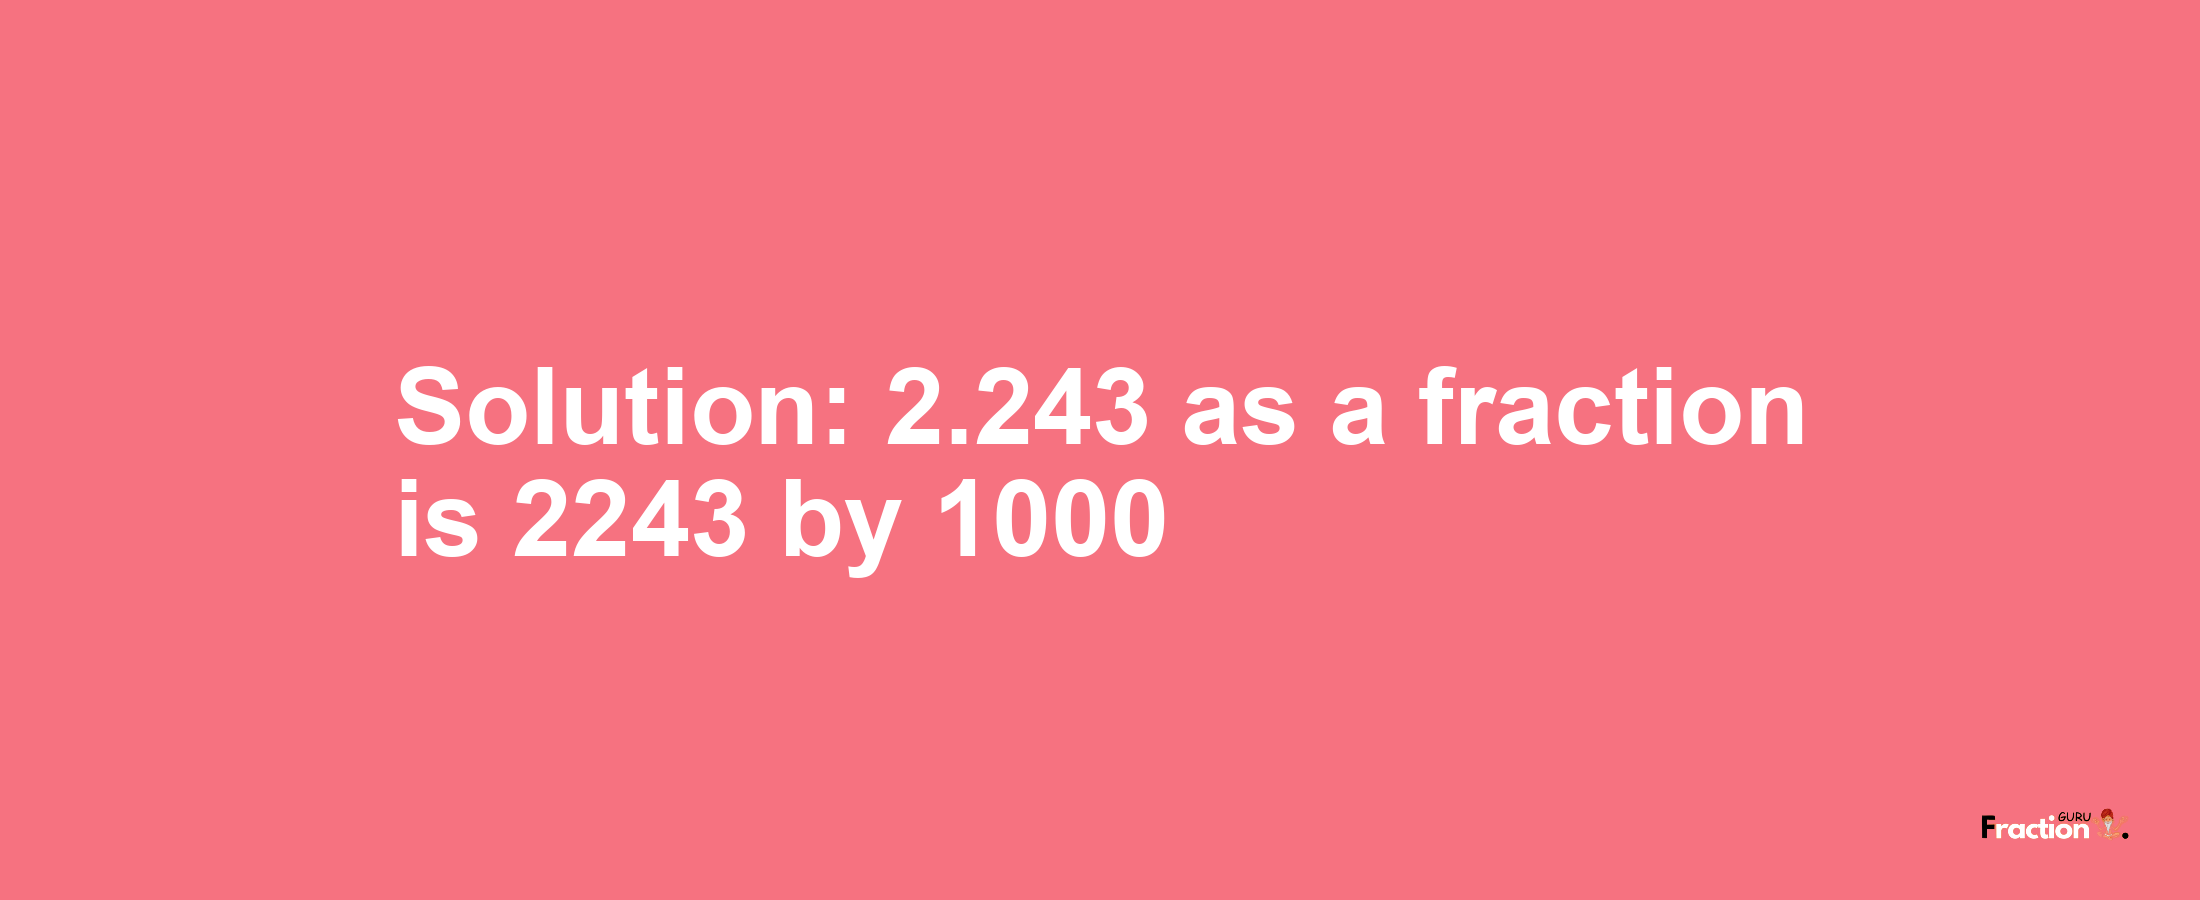 Solution:2.243 as a fraction is 2243/1000